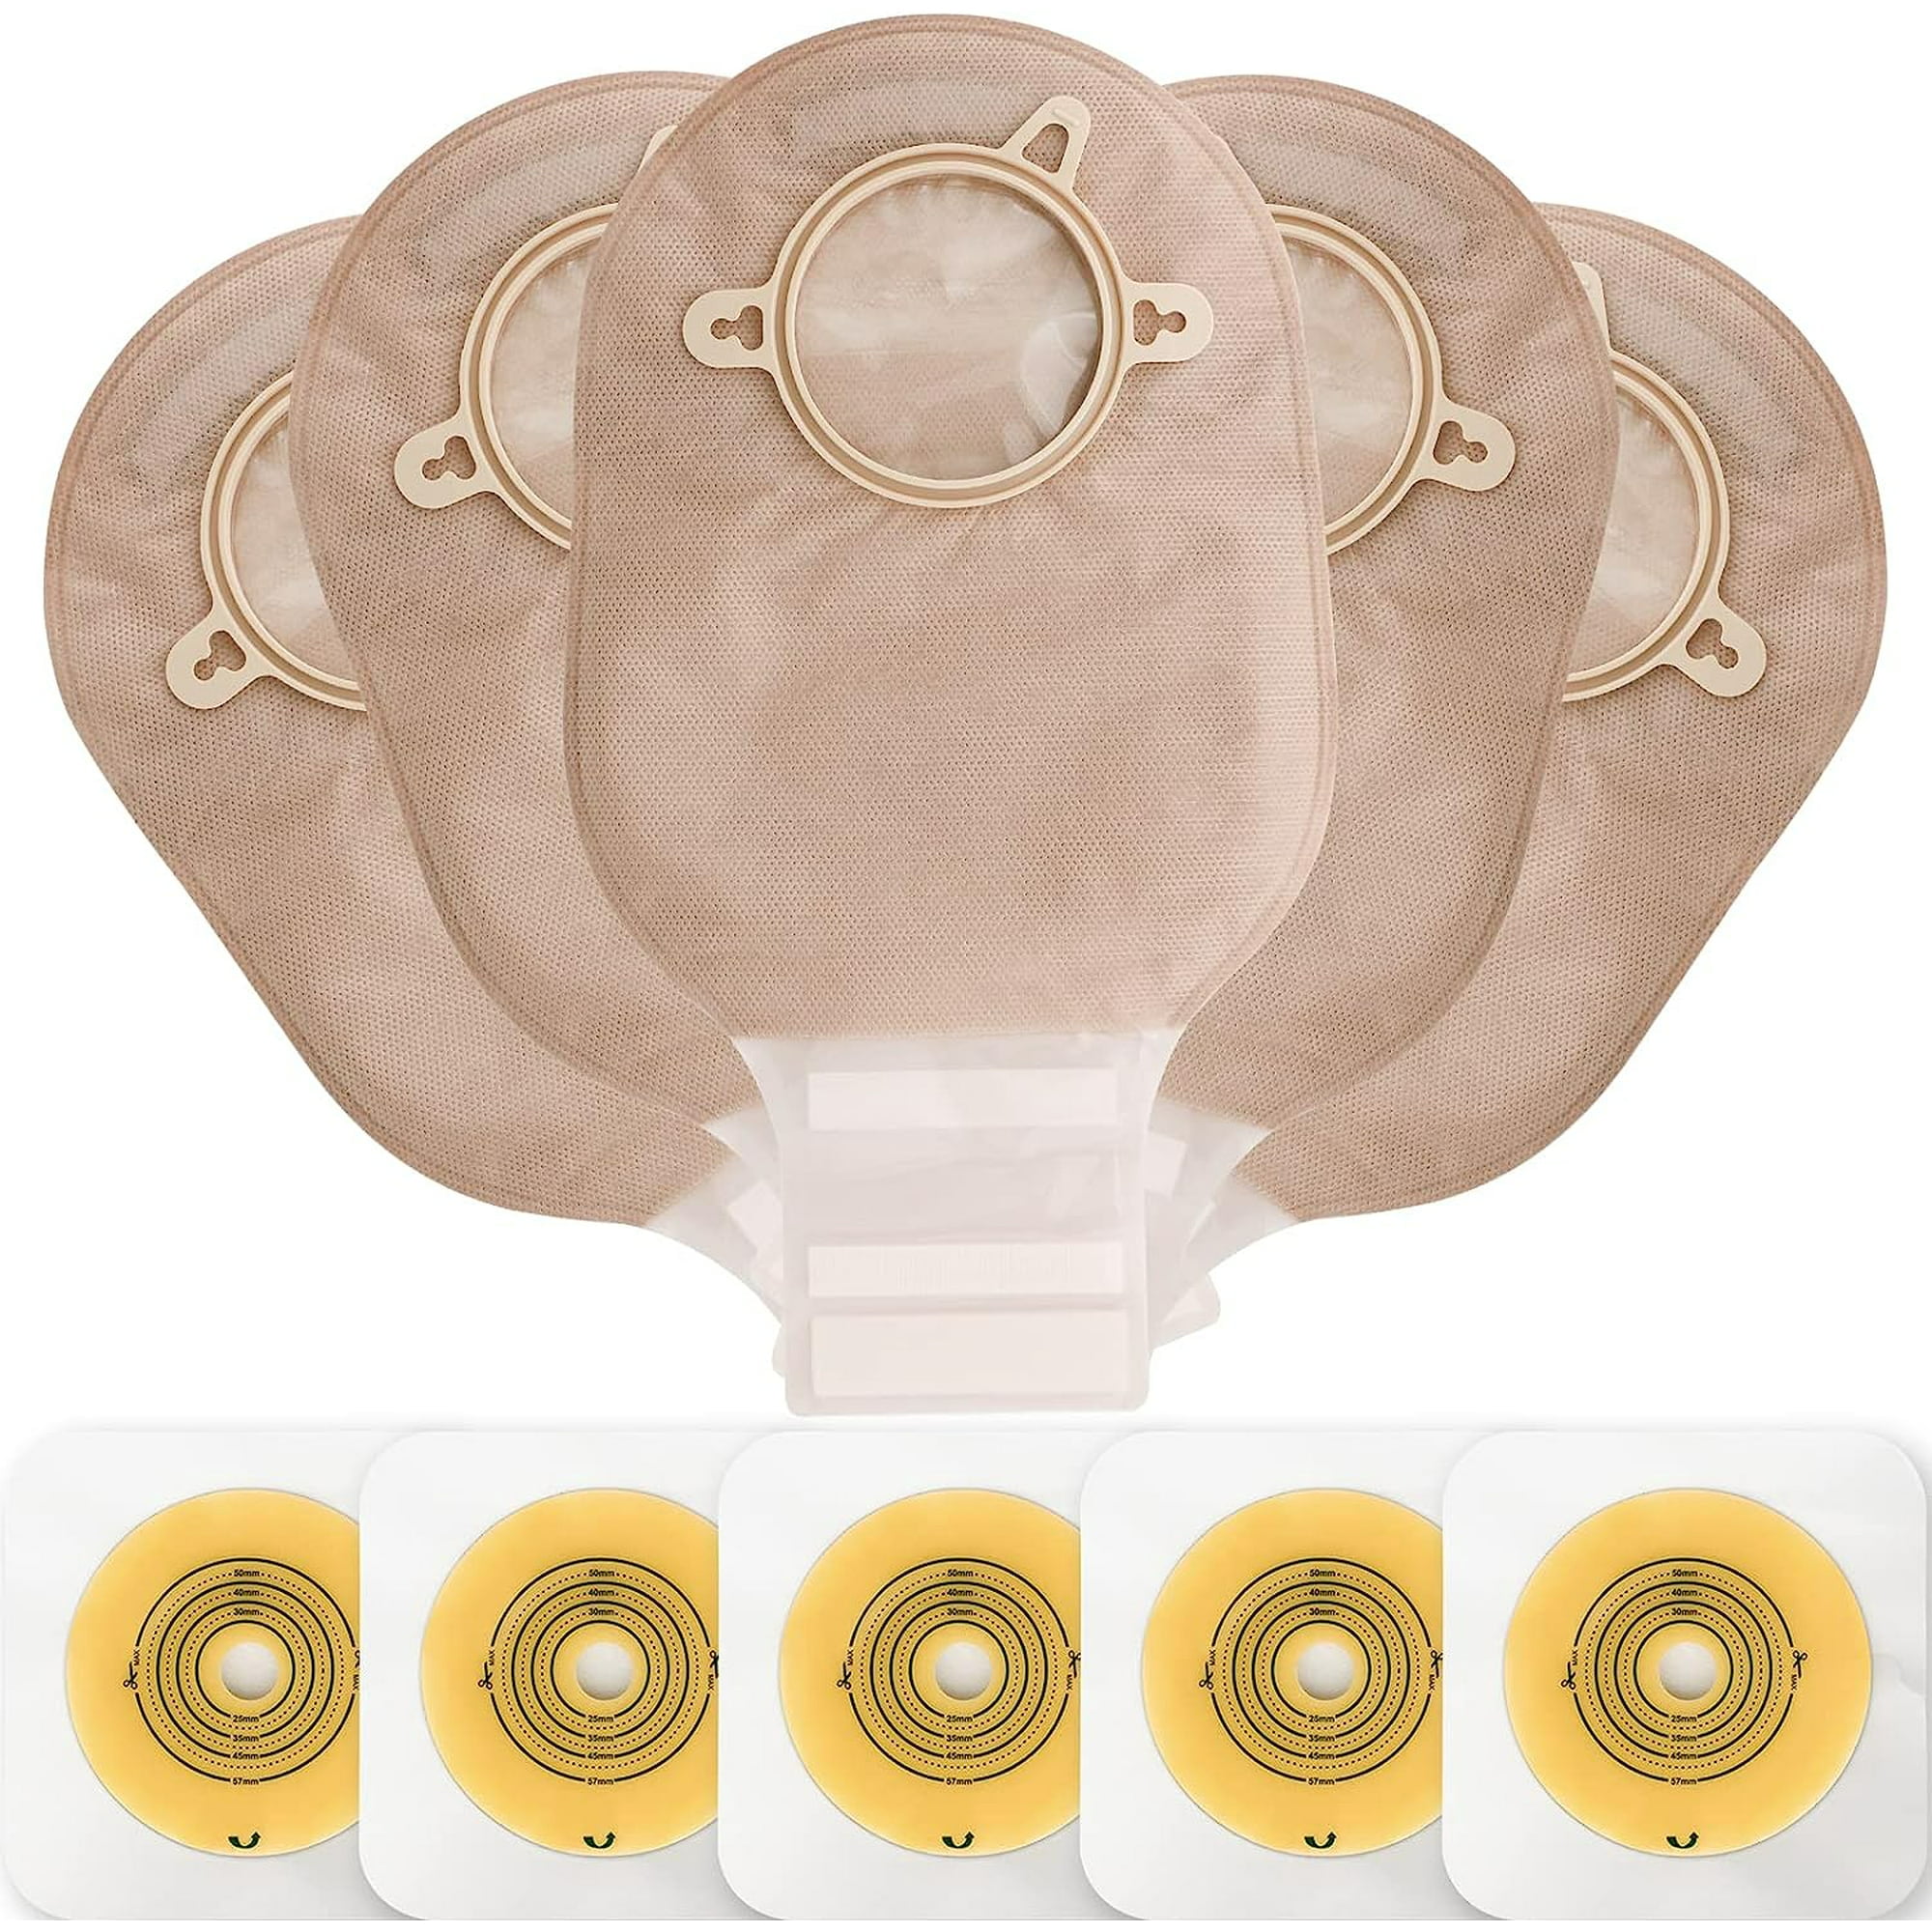 Fosa Ostomy Pouch,10pcs/Pack One-piece System Ostomy Bag Medicals